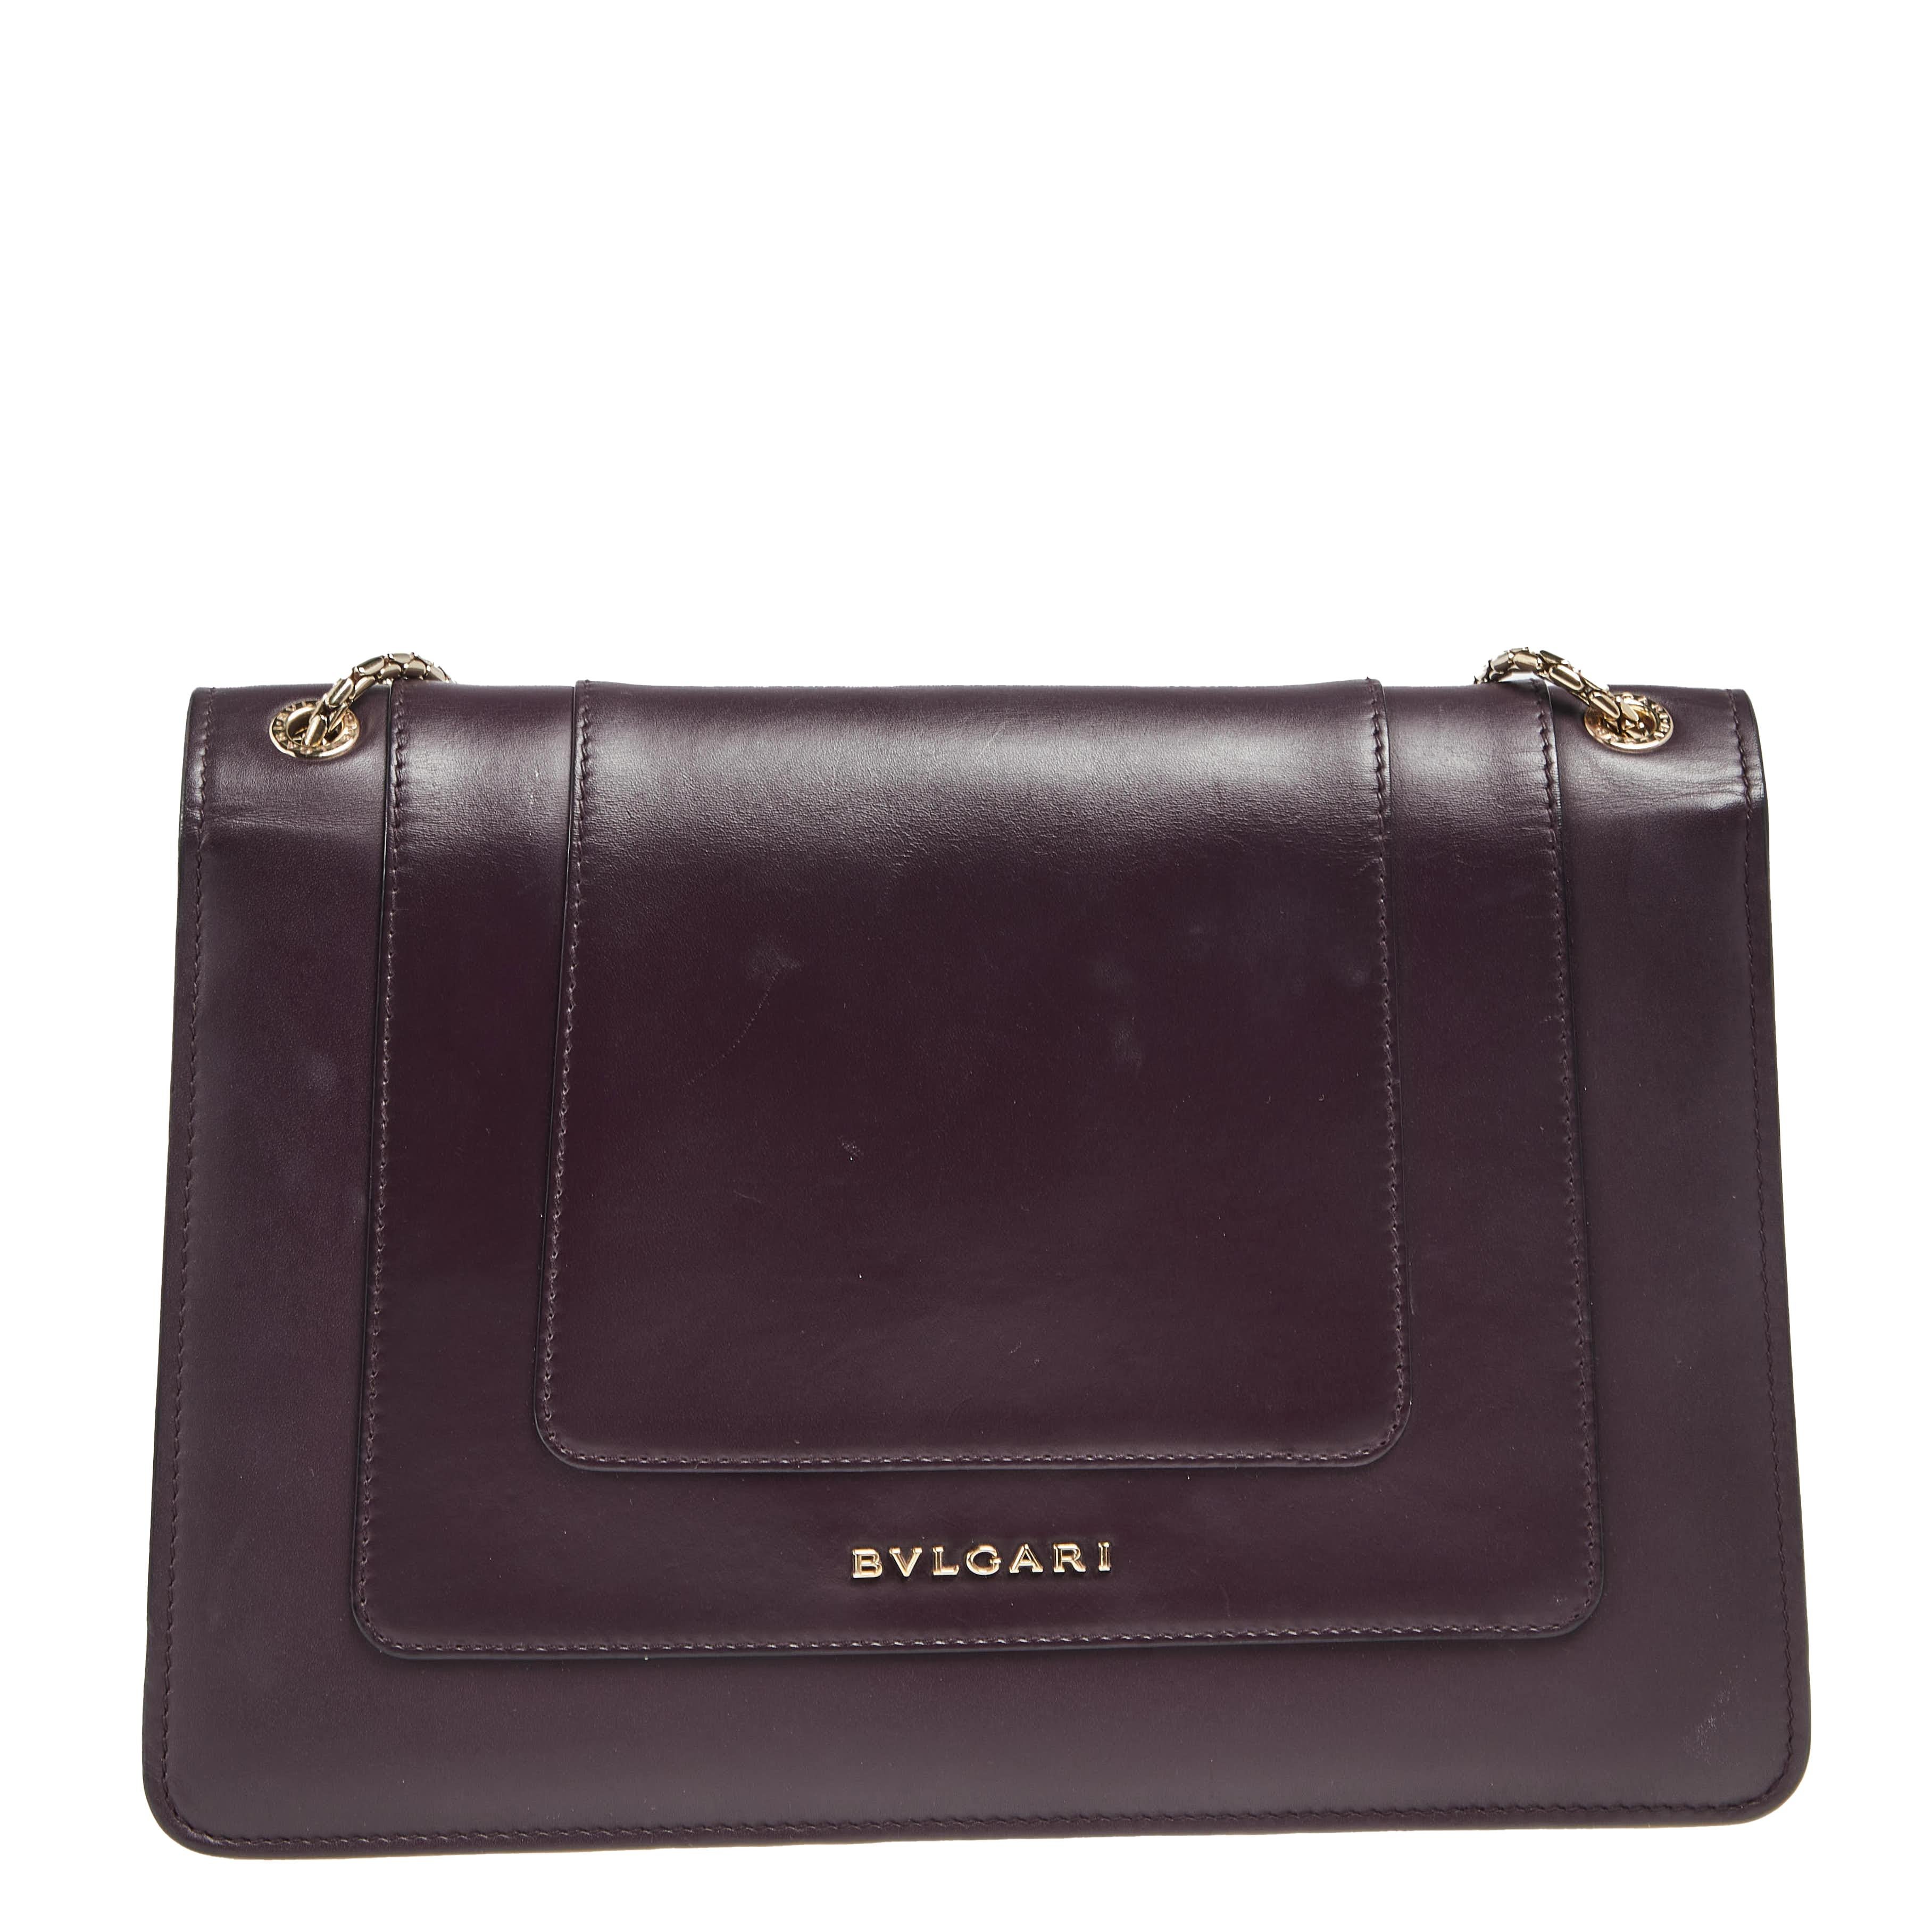 Dazzle the eyes that fall on you when you swing this stunning Bvlgari creation. Crafted from leather in a breathtaking plum hue, the shoulder bag is styled with a flap that has the iconic Serpenti head closure. The bag has a spacious fabric interior